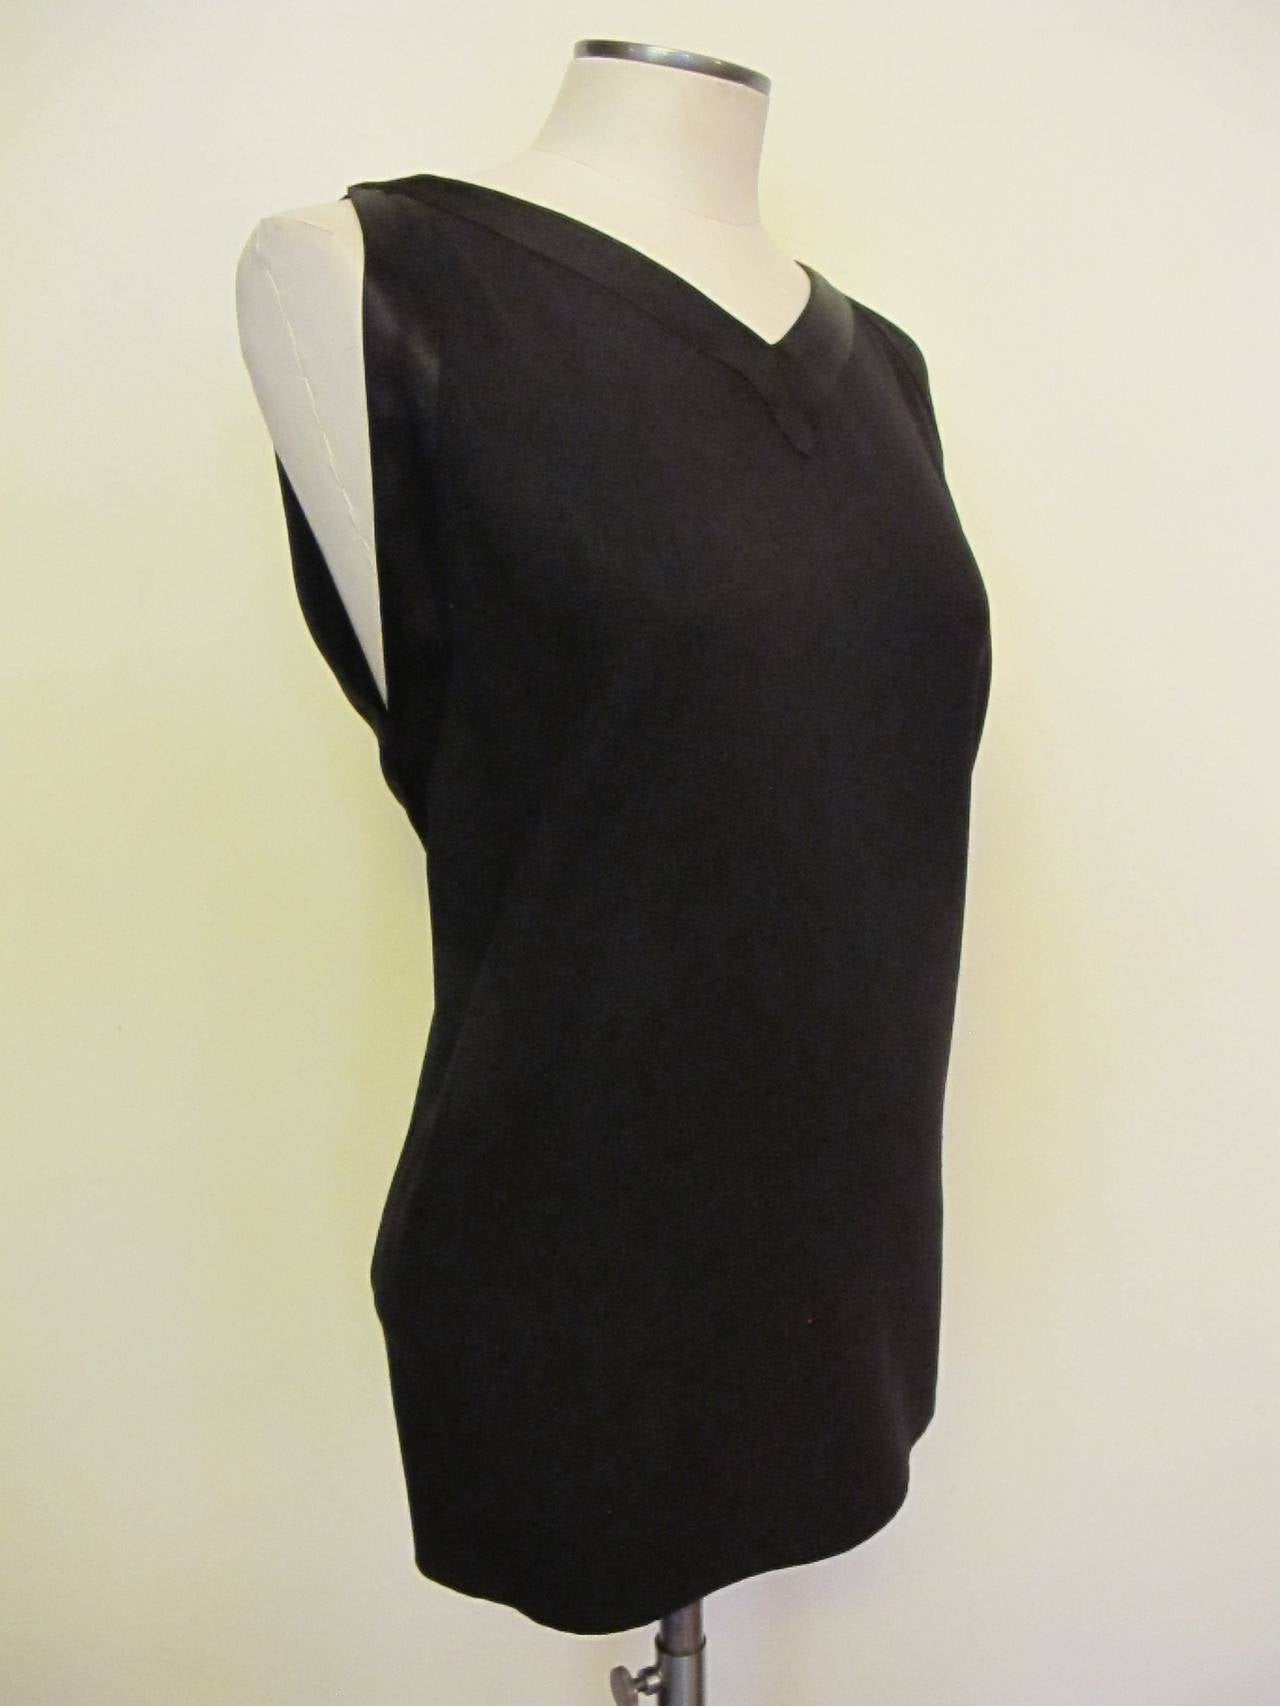 Yves Saint Laurent Rive Gauche Sleeveless Black Blouse In Excellent Condition For Sale In San Francisco, CA